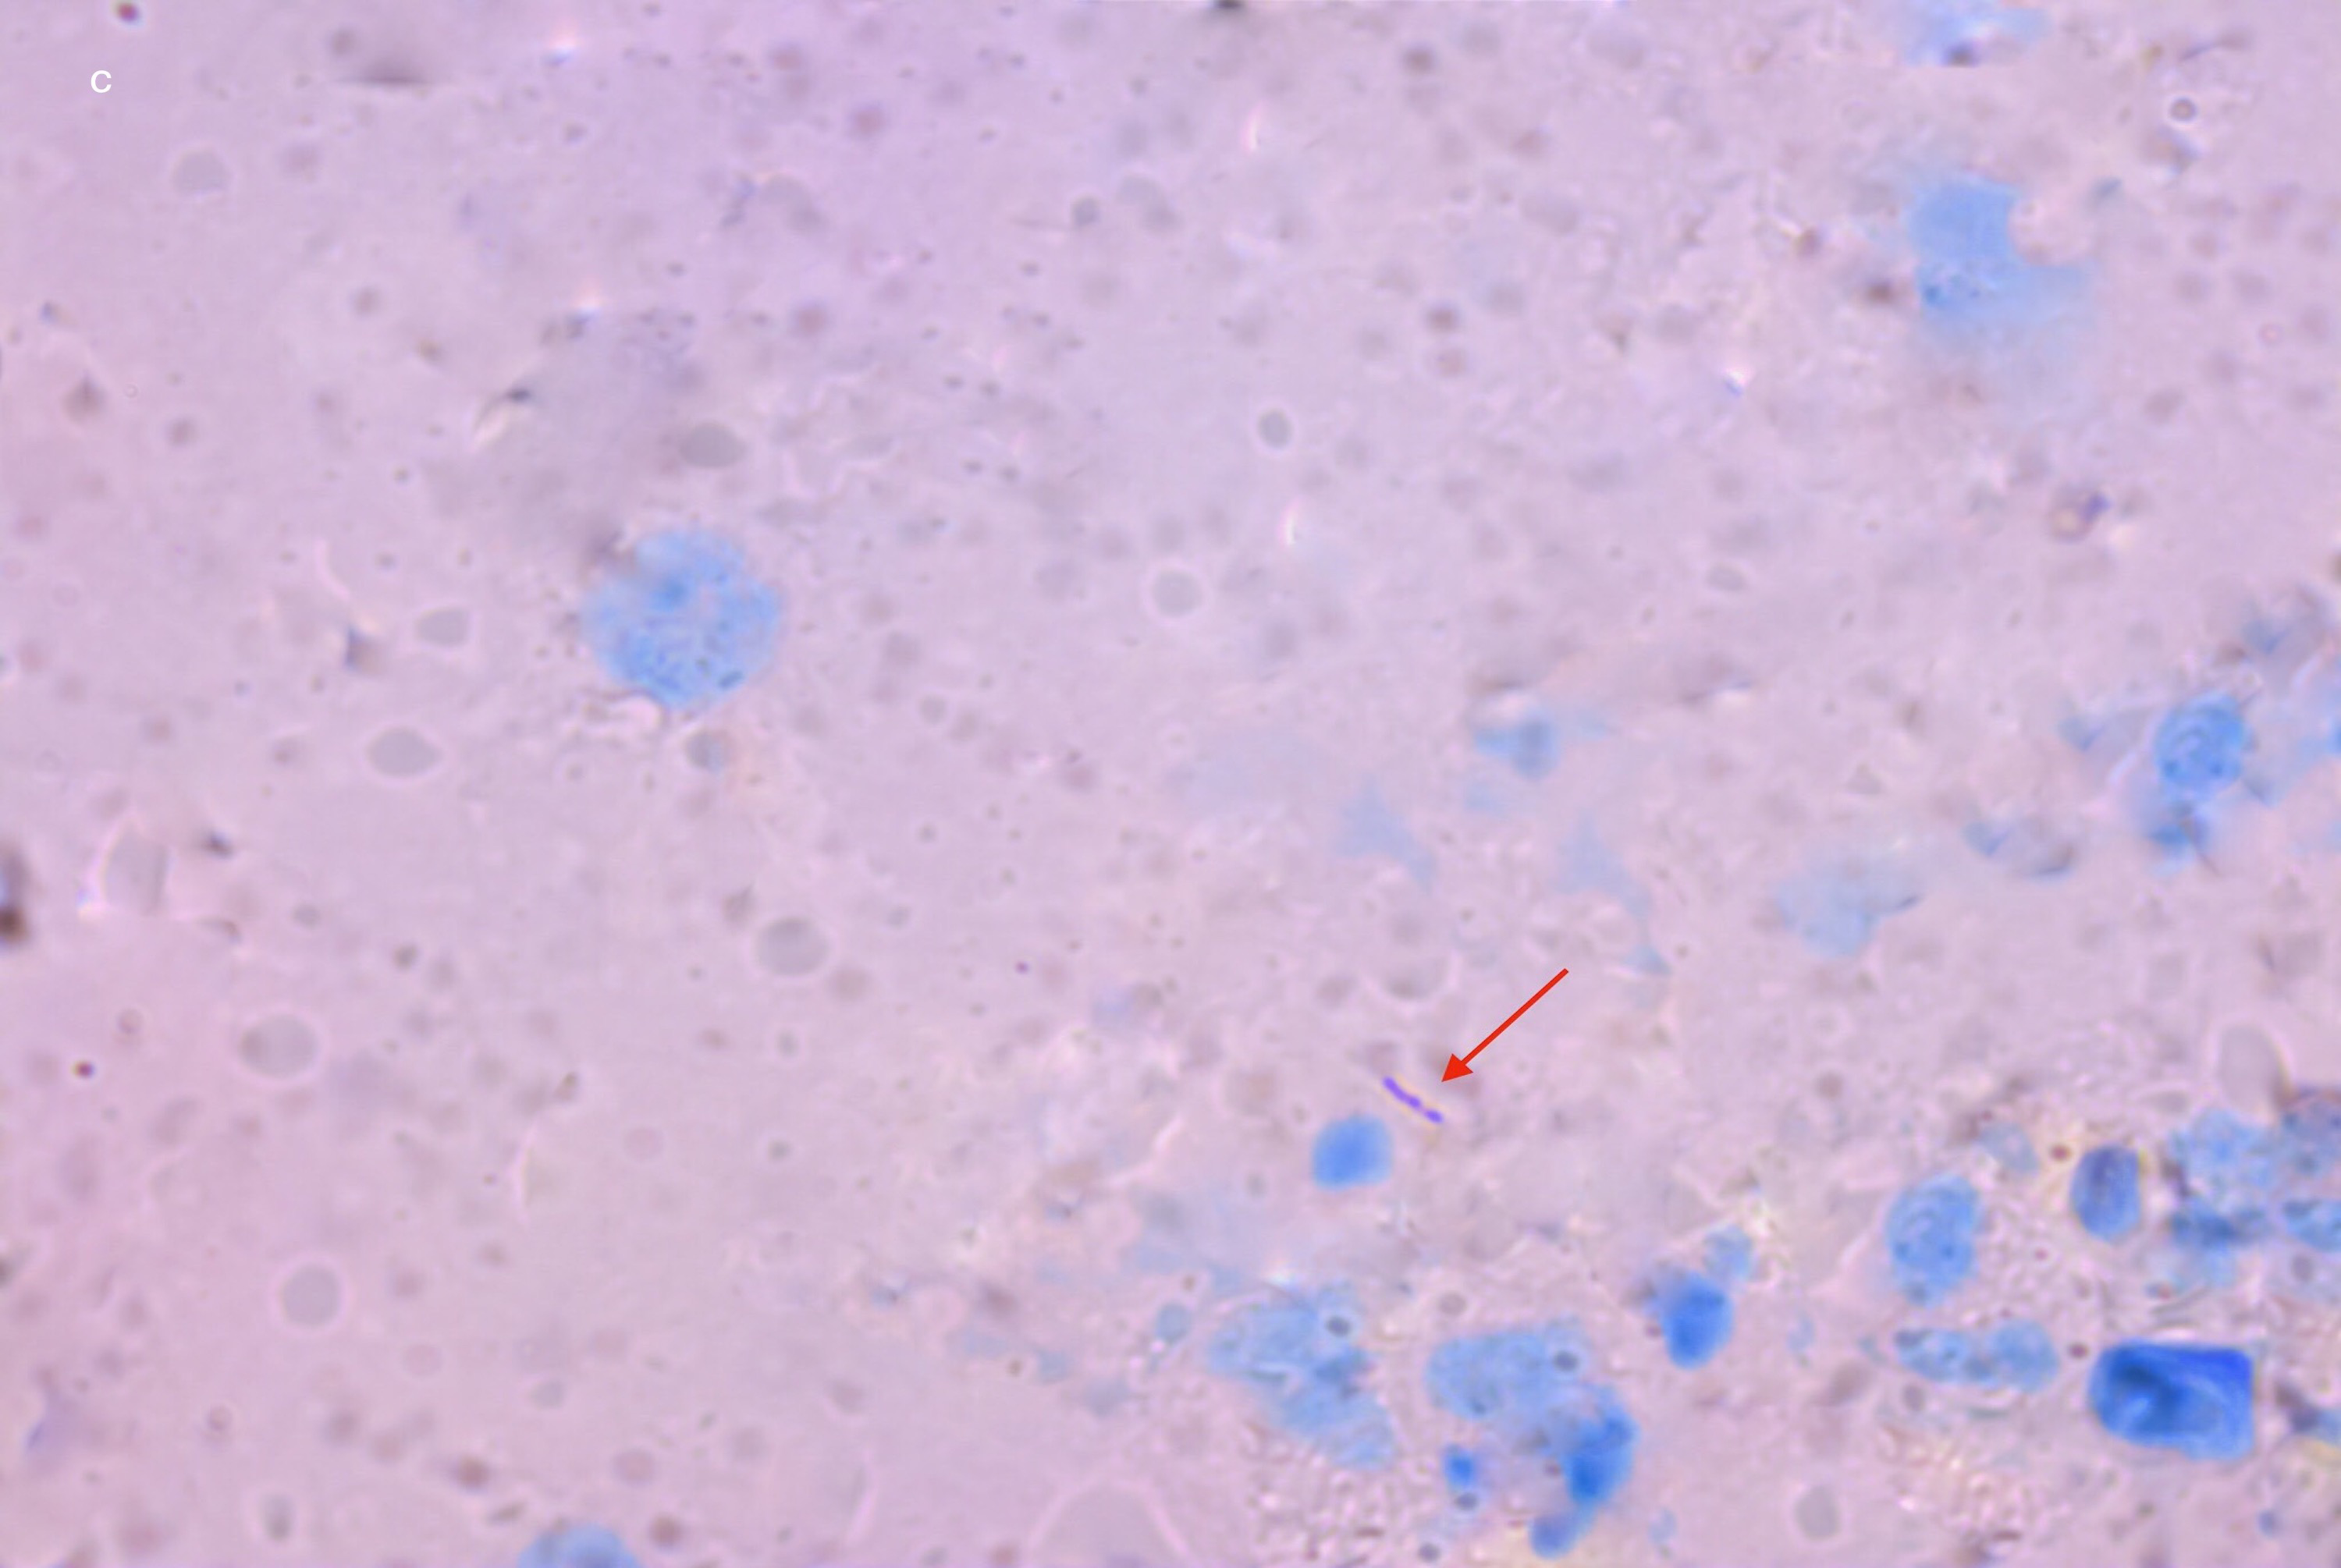 Acid-fast Bacilli in aspirated material from leg nodule (red arrow). (1000×, Ziehl Neelsen stain)